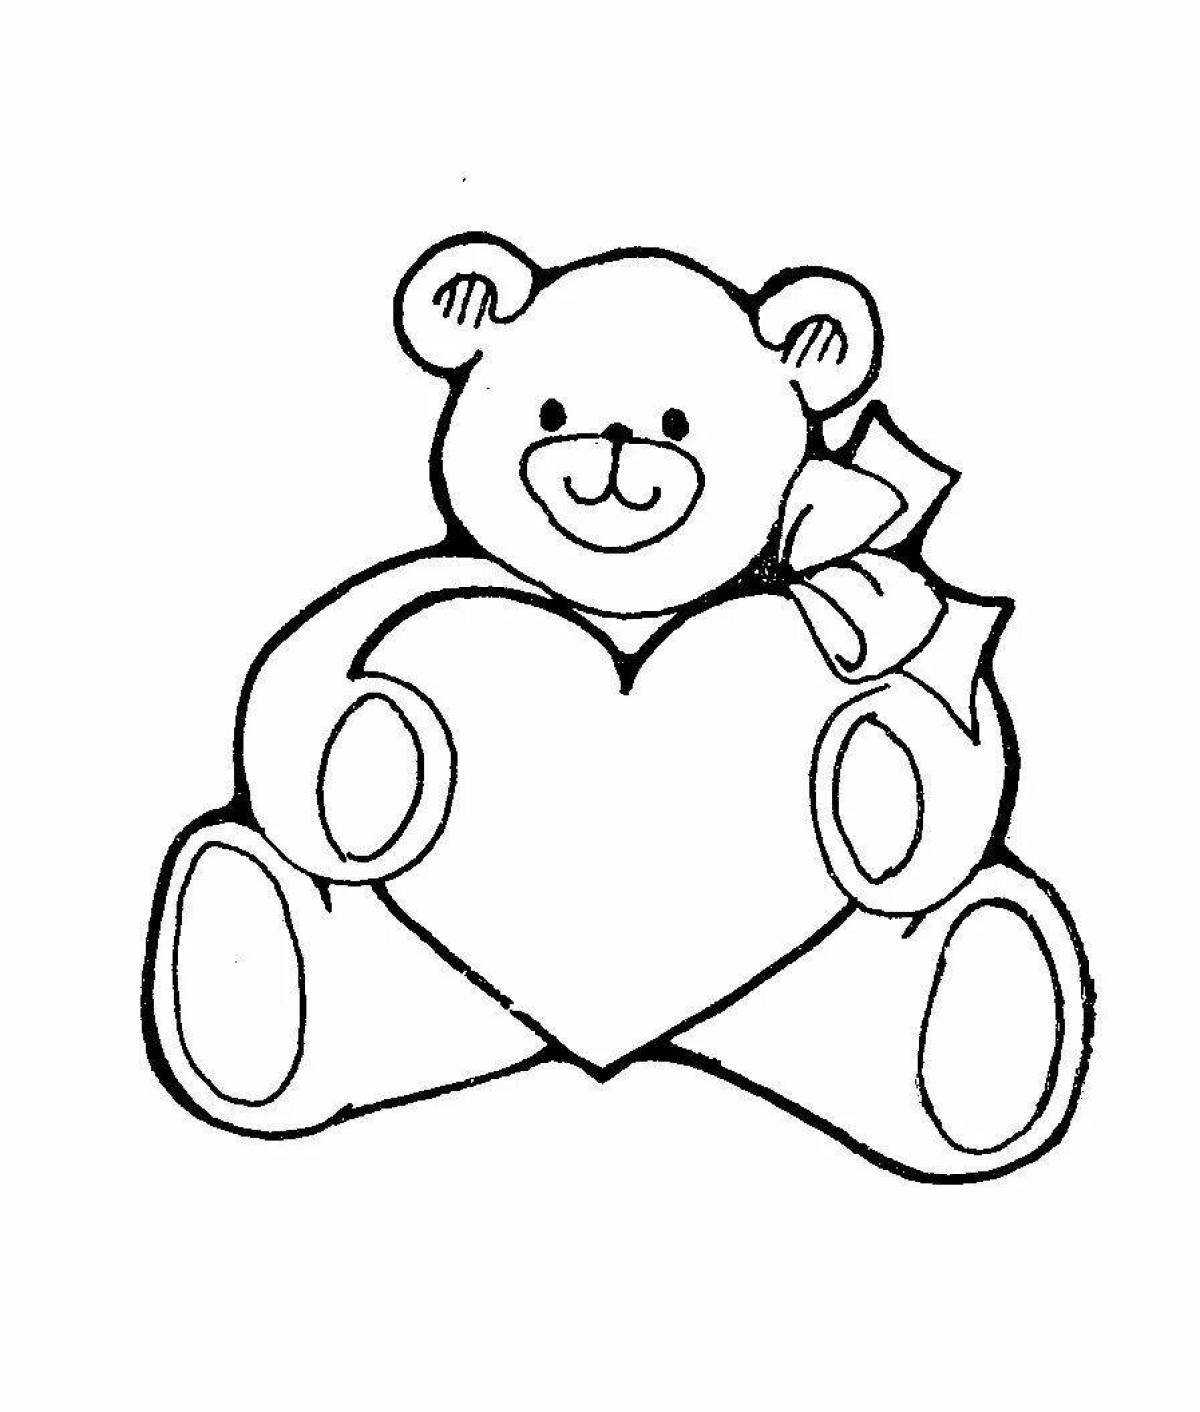 Cherished teddy bear with heart coloring book